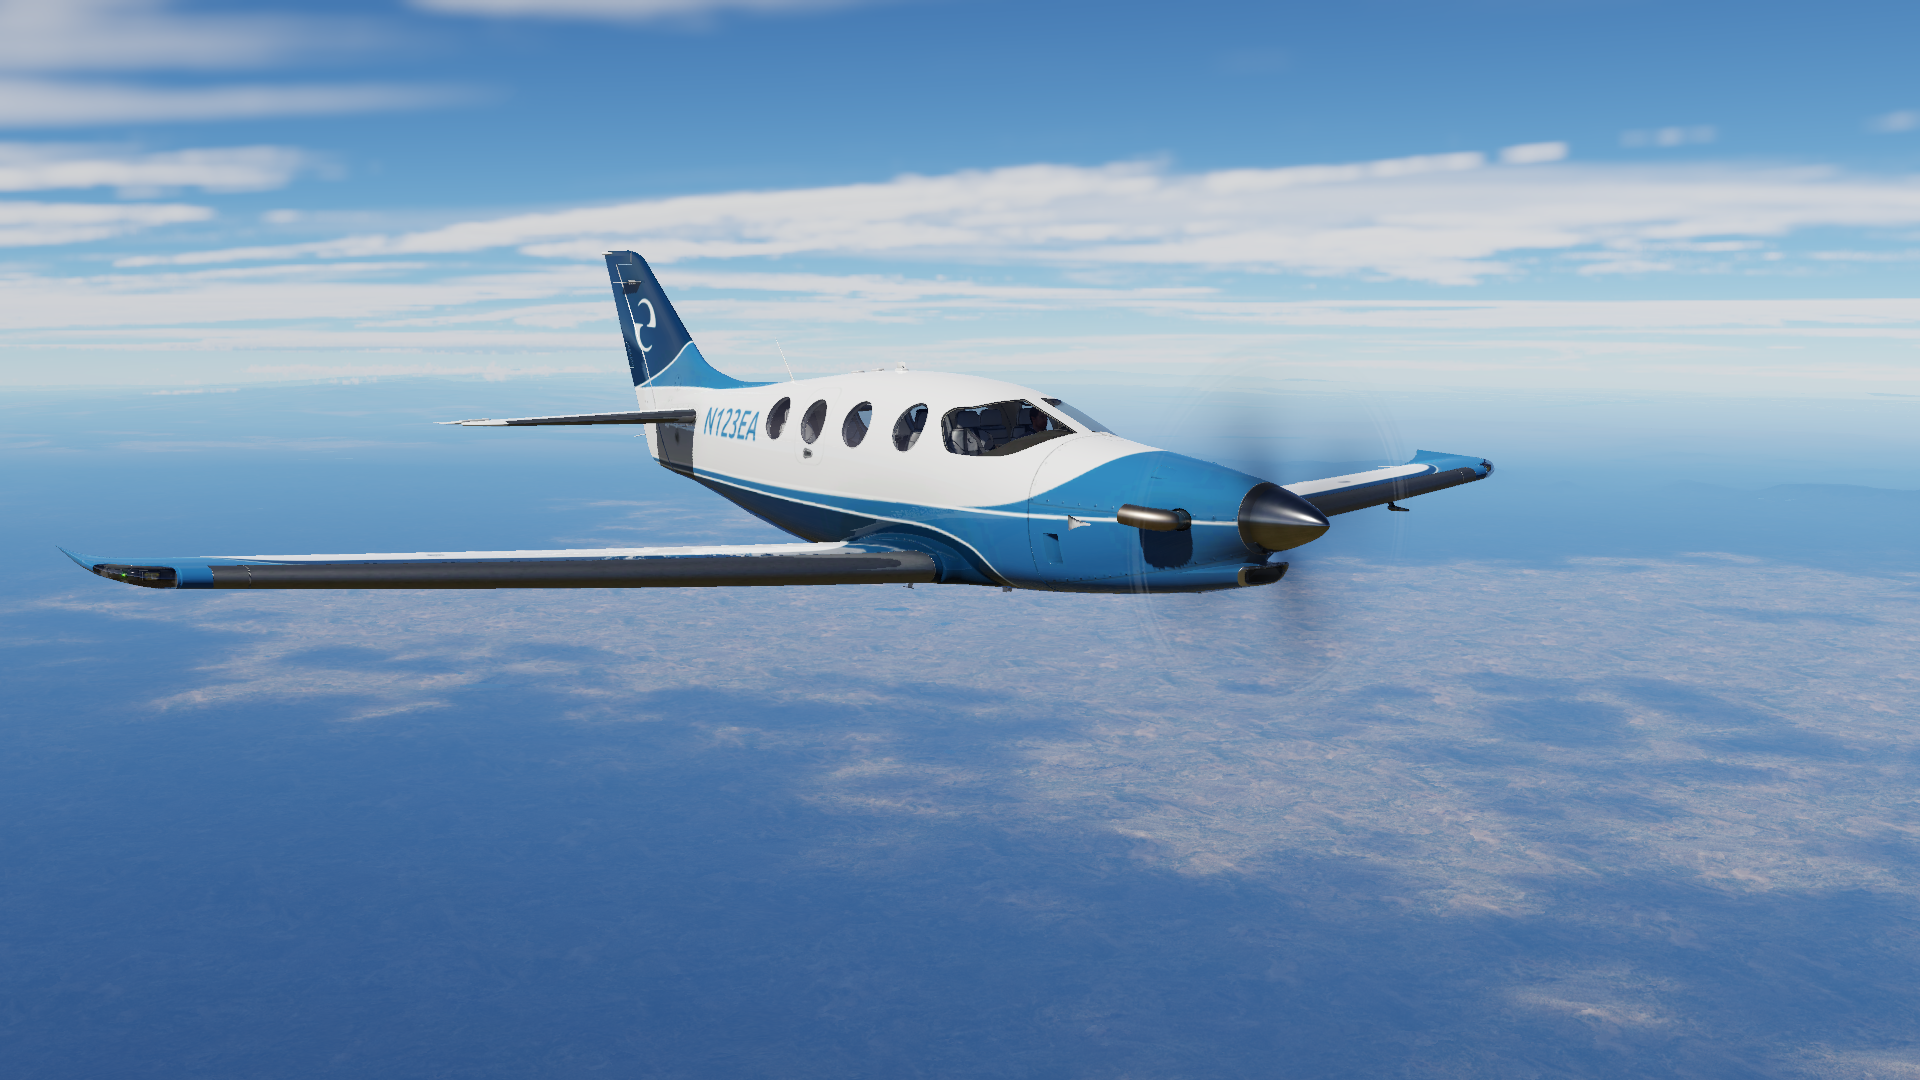 MEC-263 enroute to KEAR @ FL270 after picking up a brand new ECPIC-1000 @ KBDN. This is a very powerful aircraft. Think I'm going to really enjoy flyi